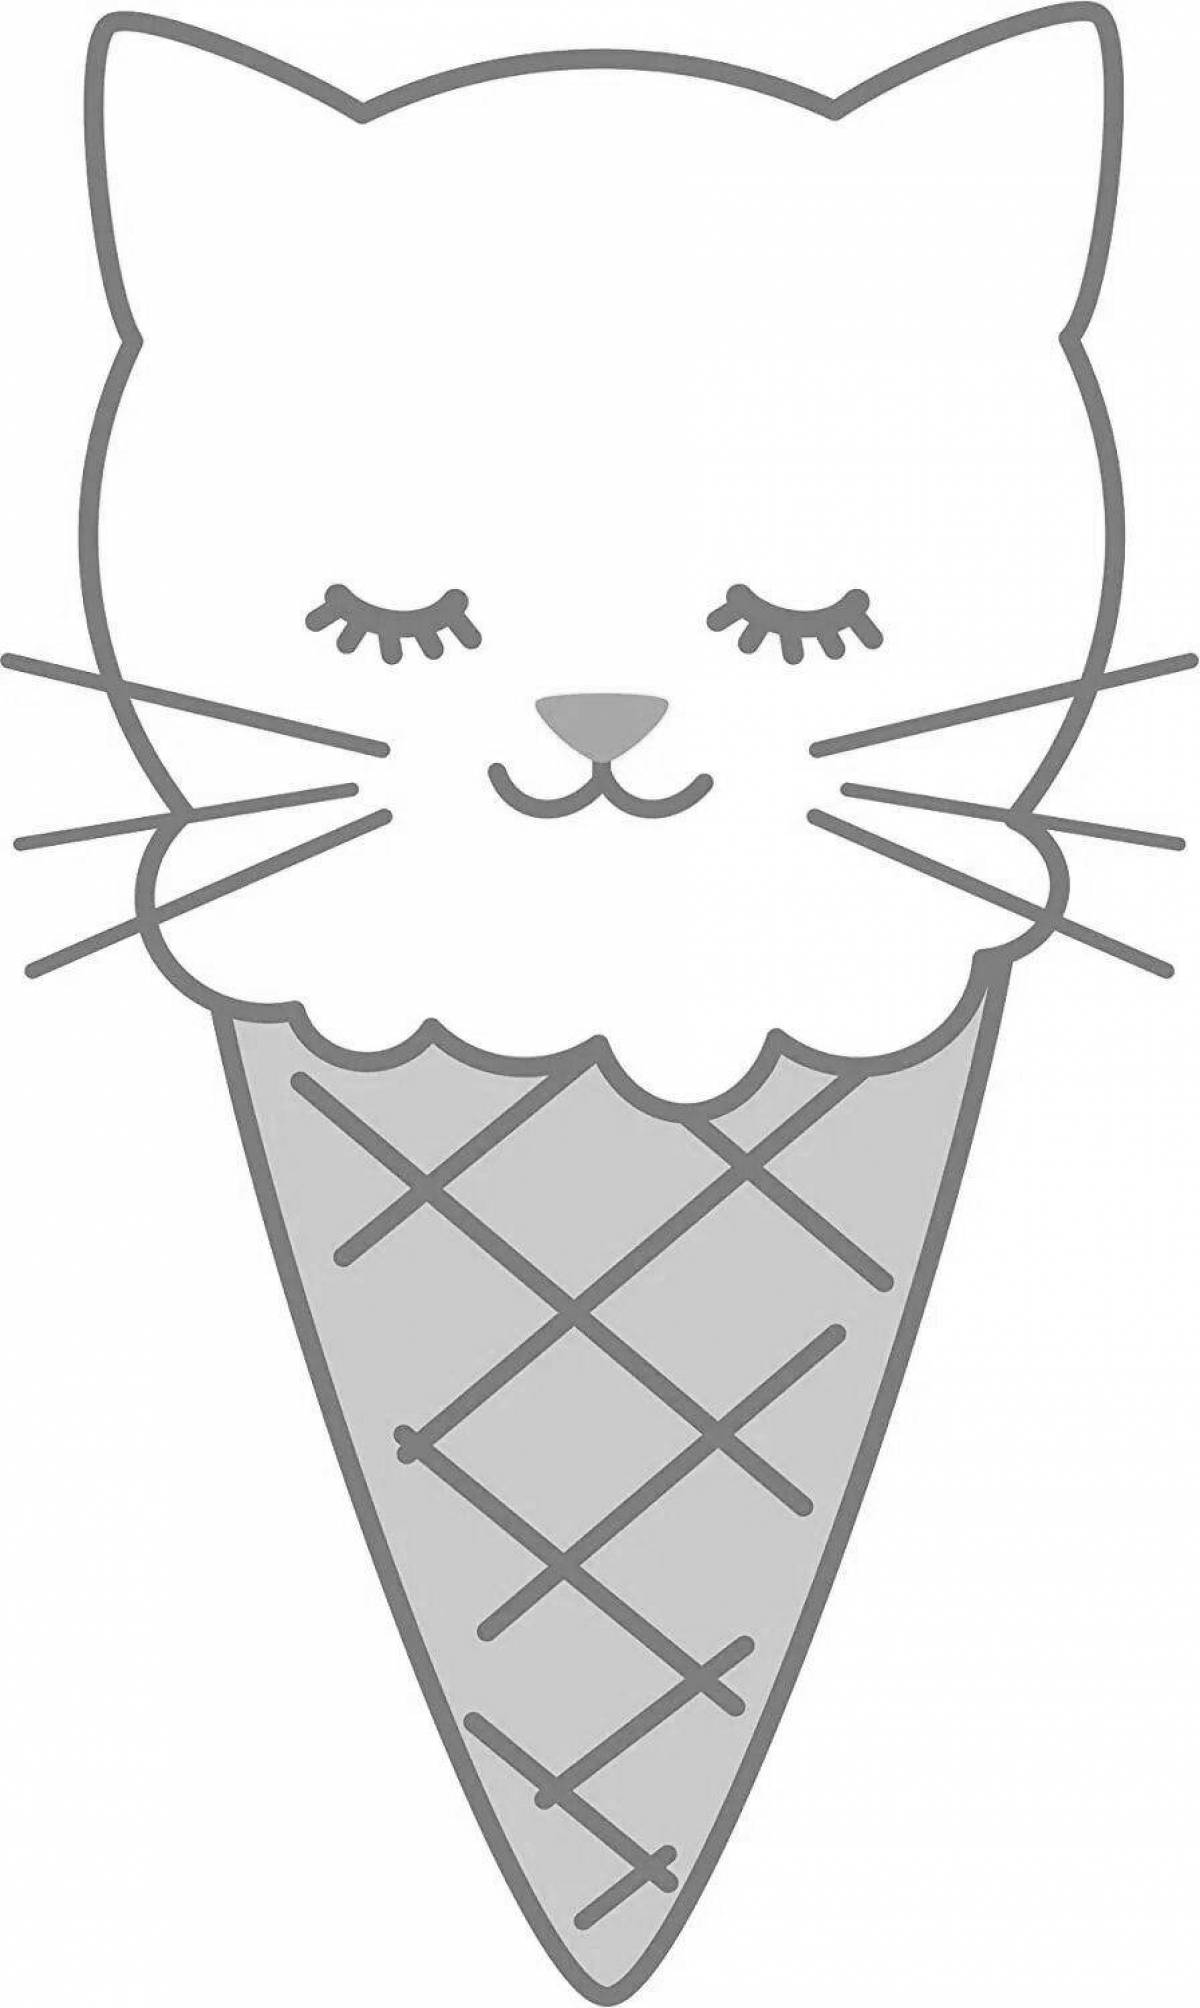 Coloring page adorable ice cream cat